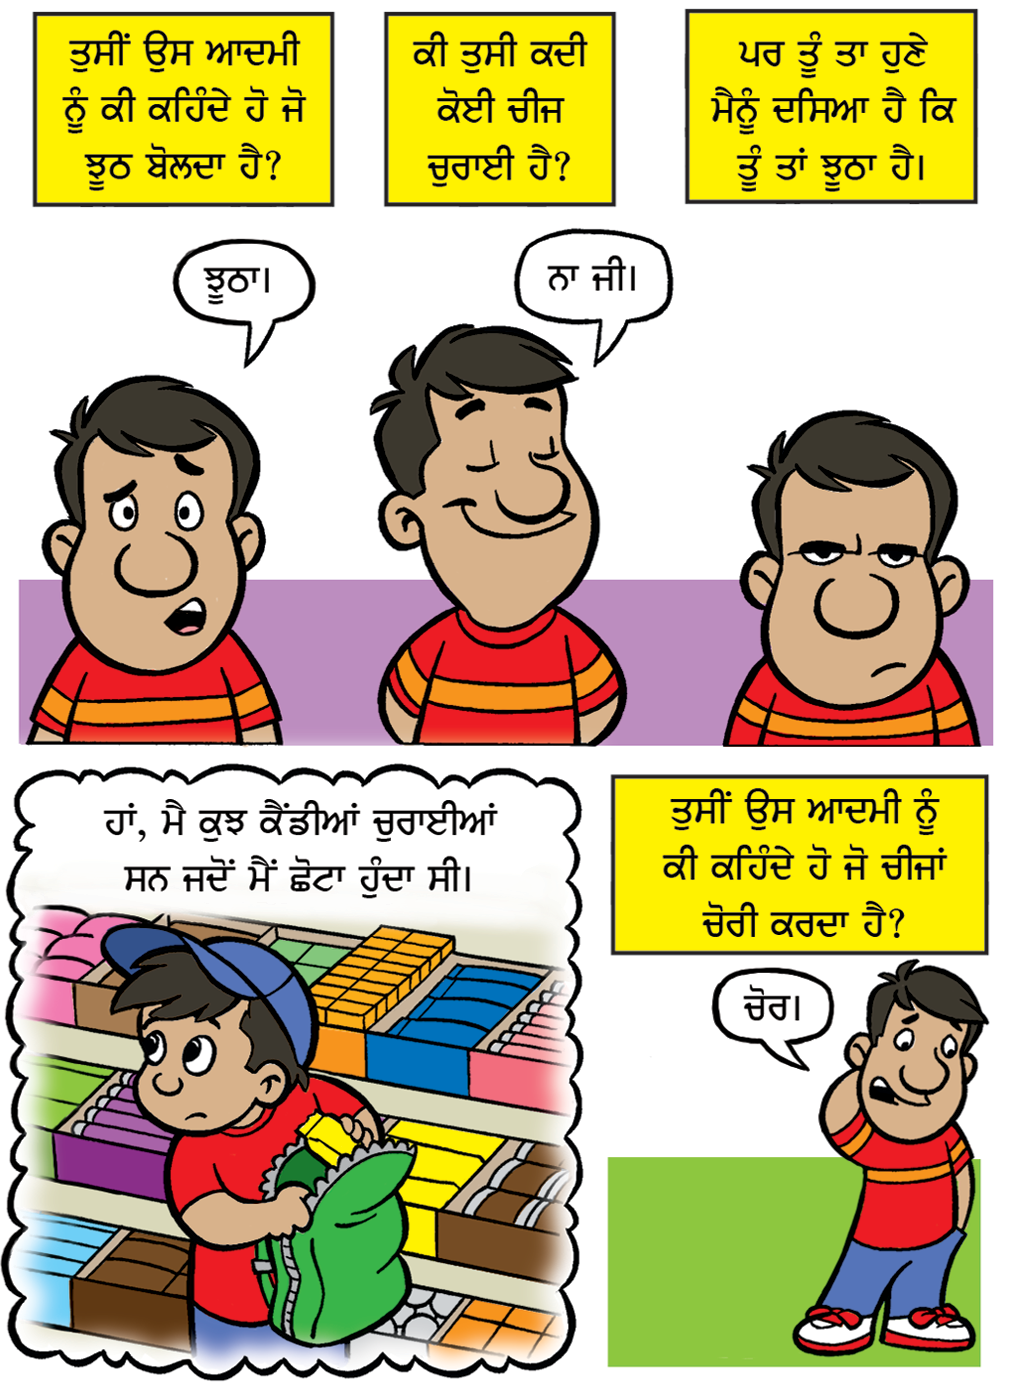 Are You A Good Person? (Punjabi Version) – Free Cartoon Gospel Tract